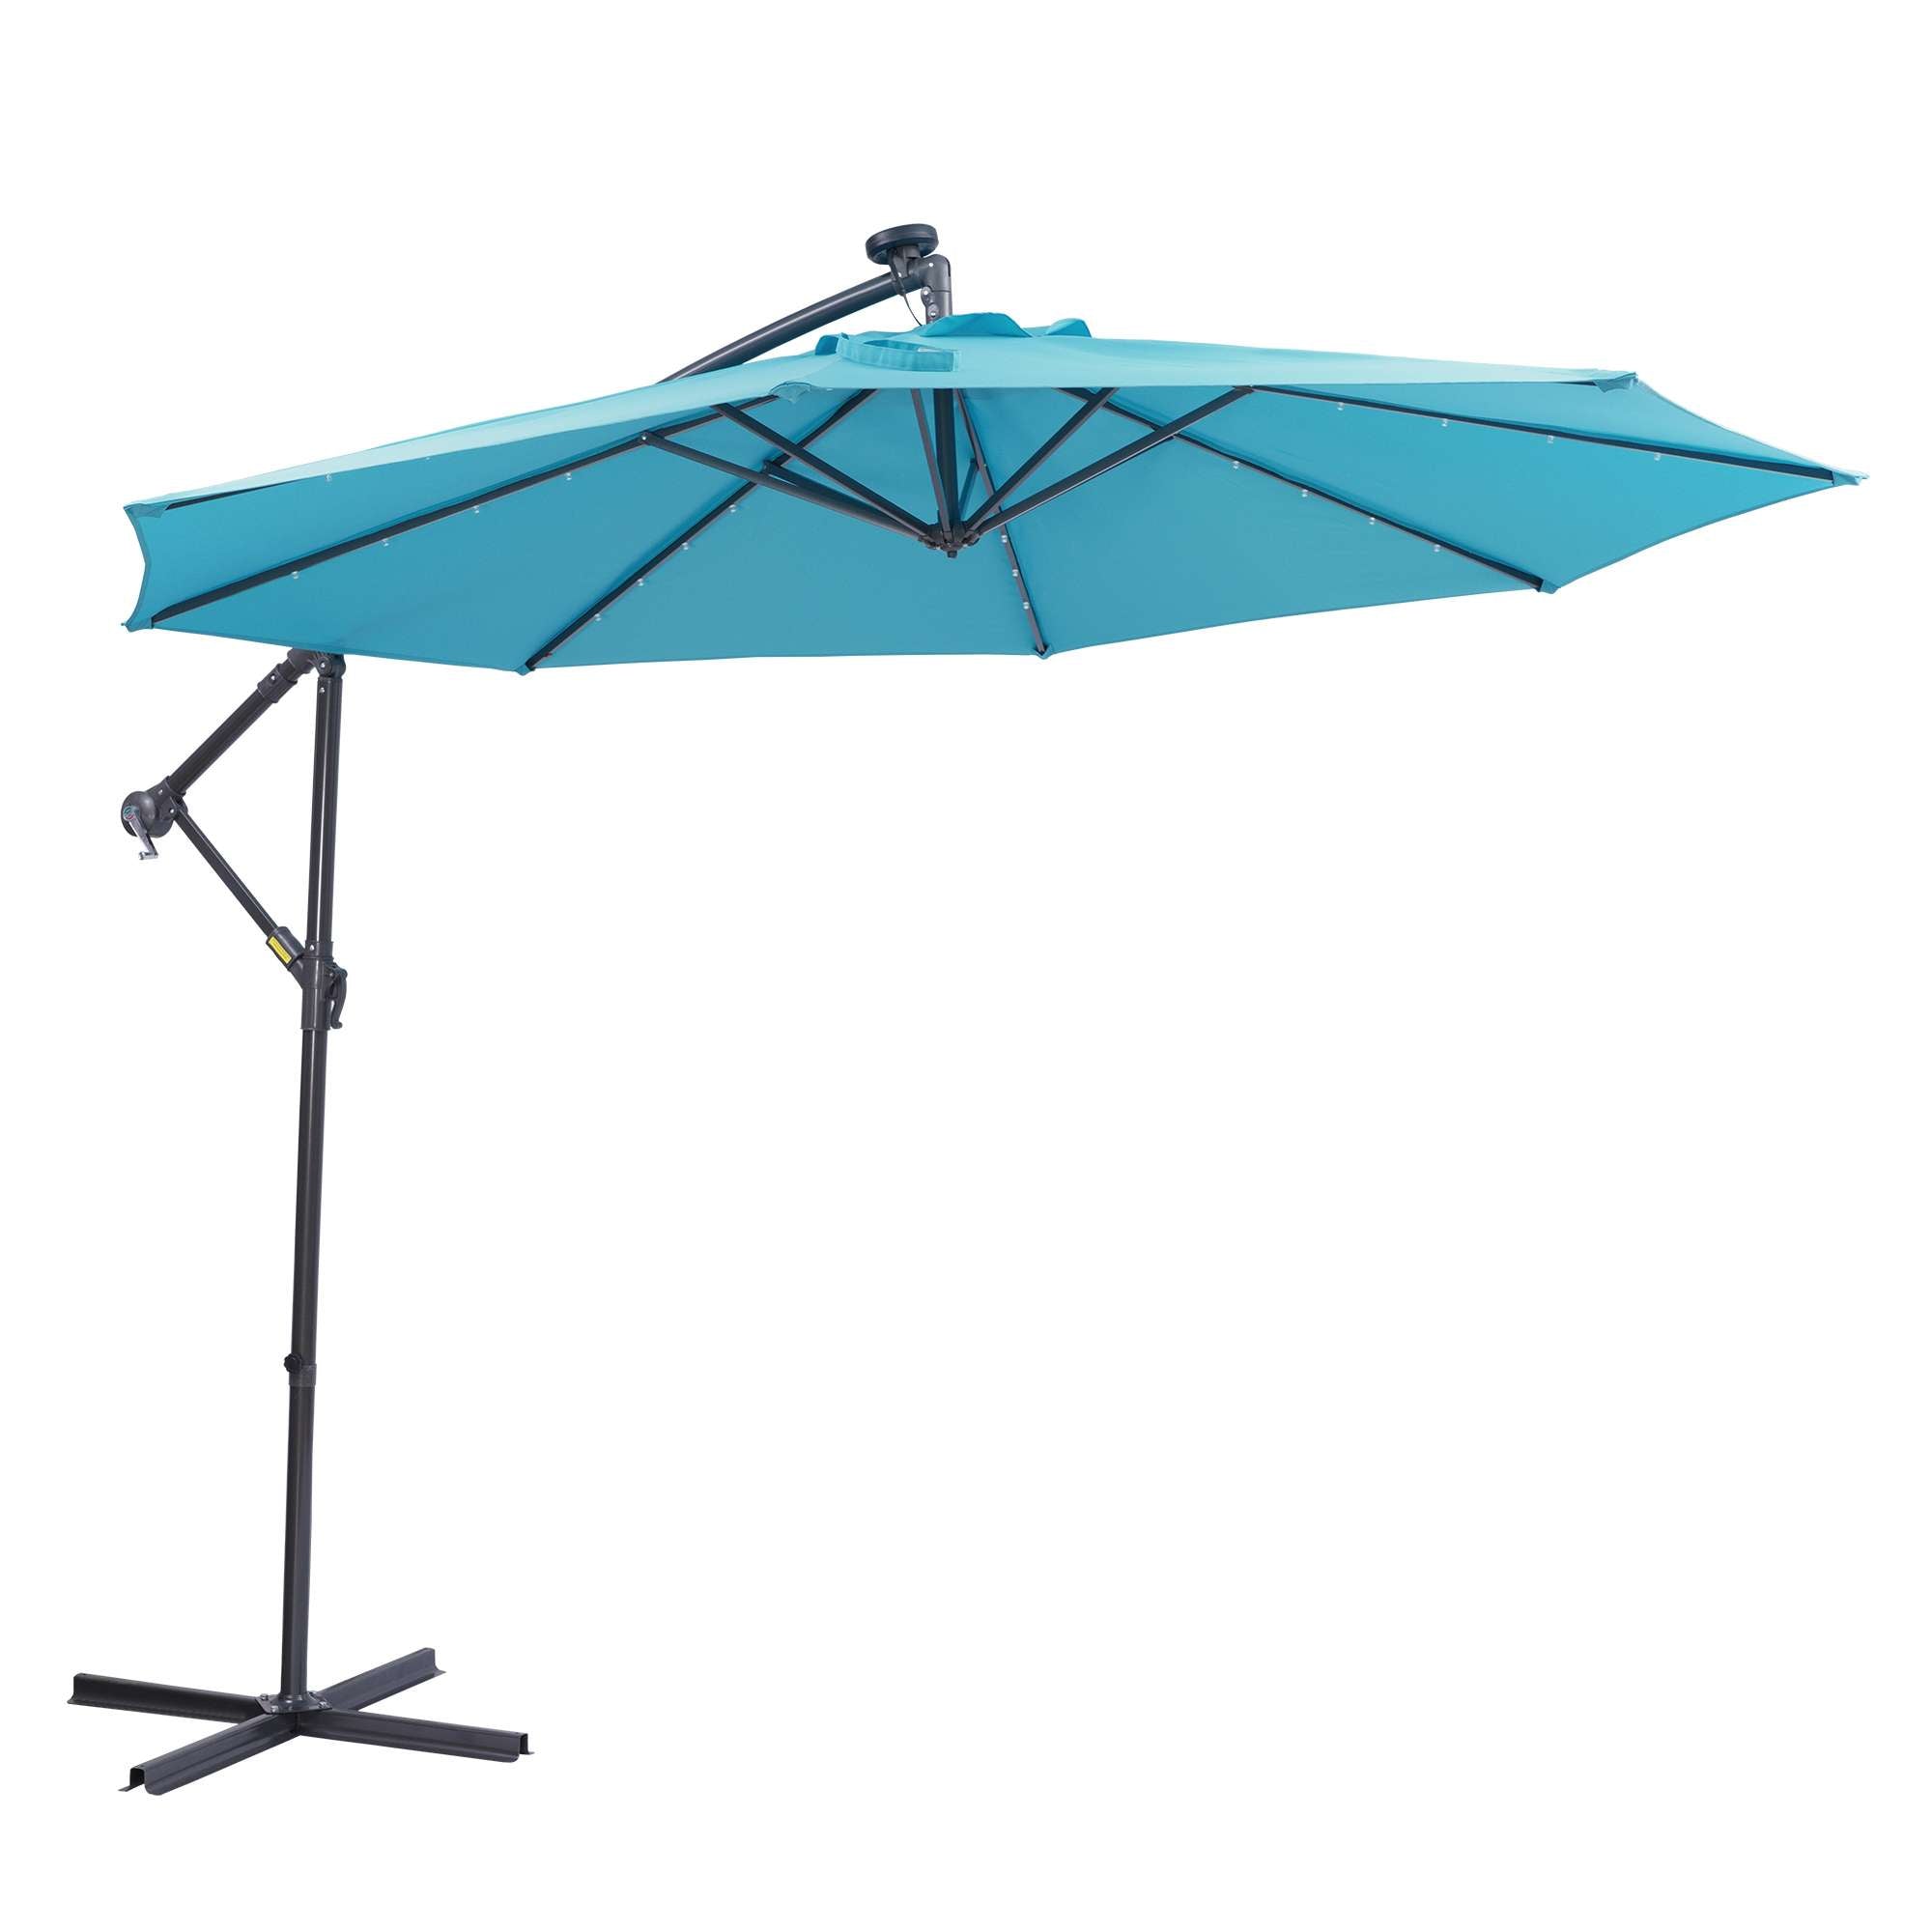 [KGORGE Plus]10 FT Solar Powered No-tilt Cantilever Patio Umbrella Commercial and Residential with 32 LED Lights